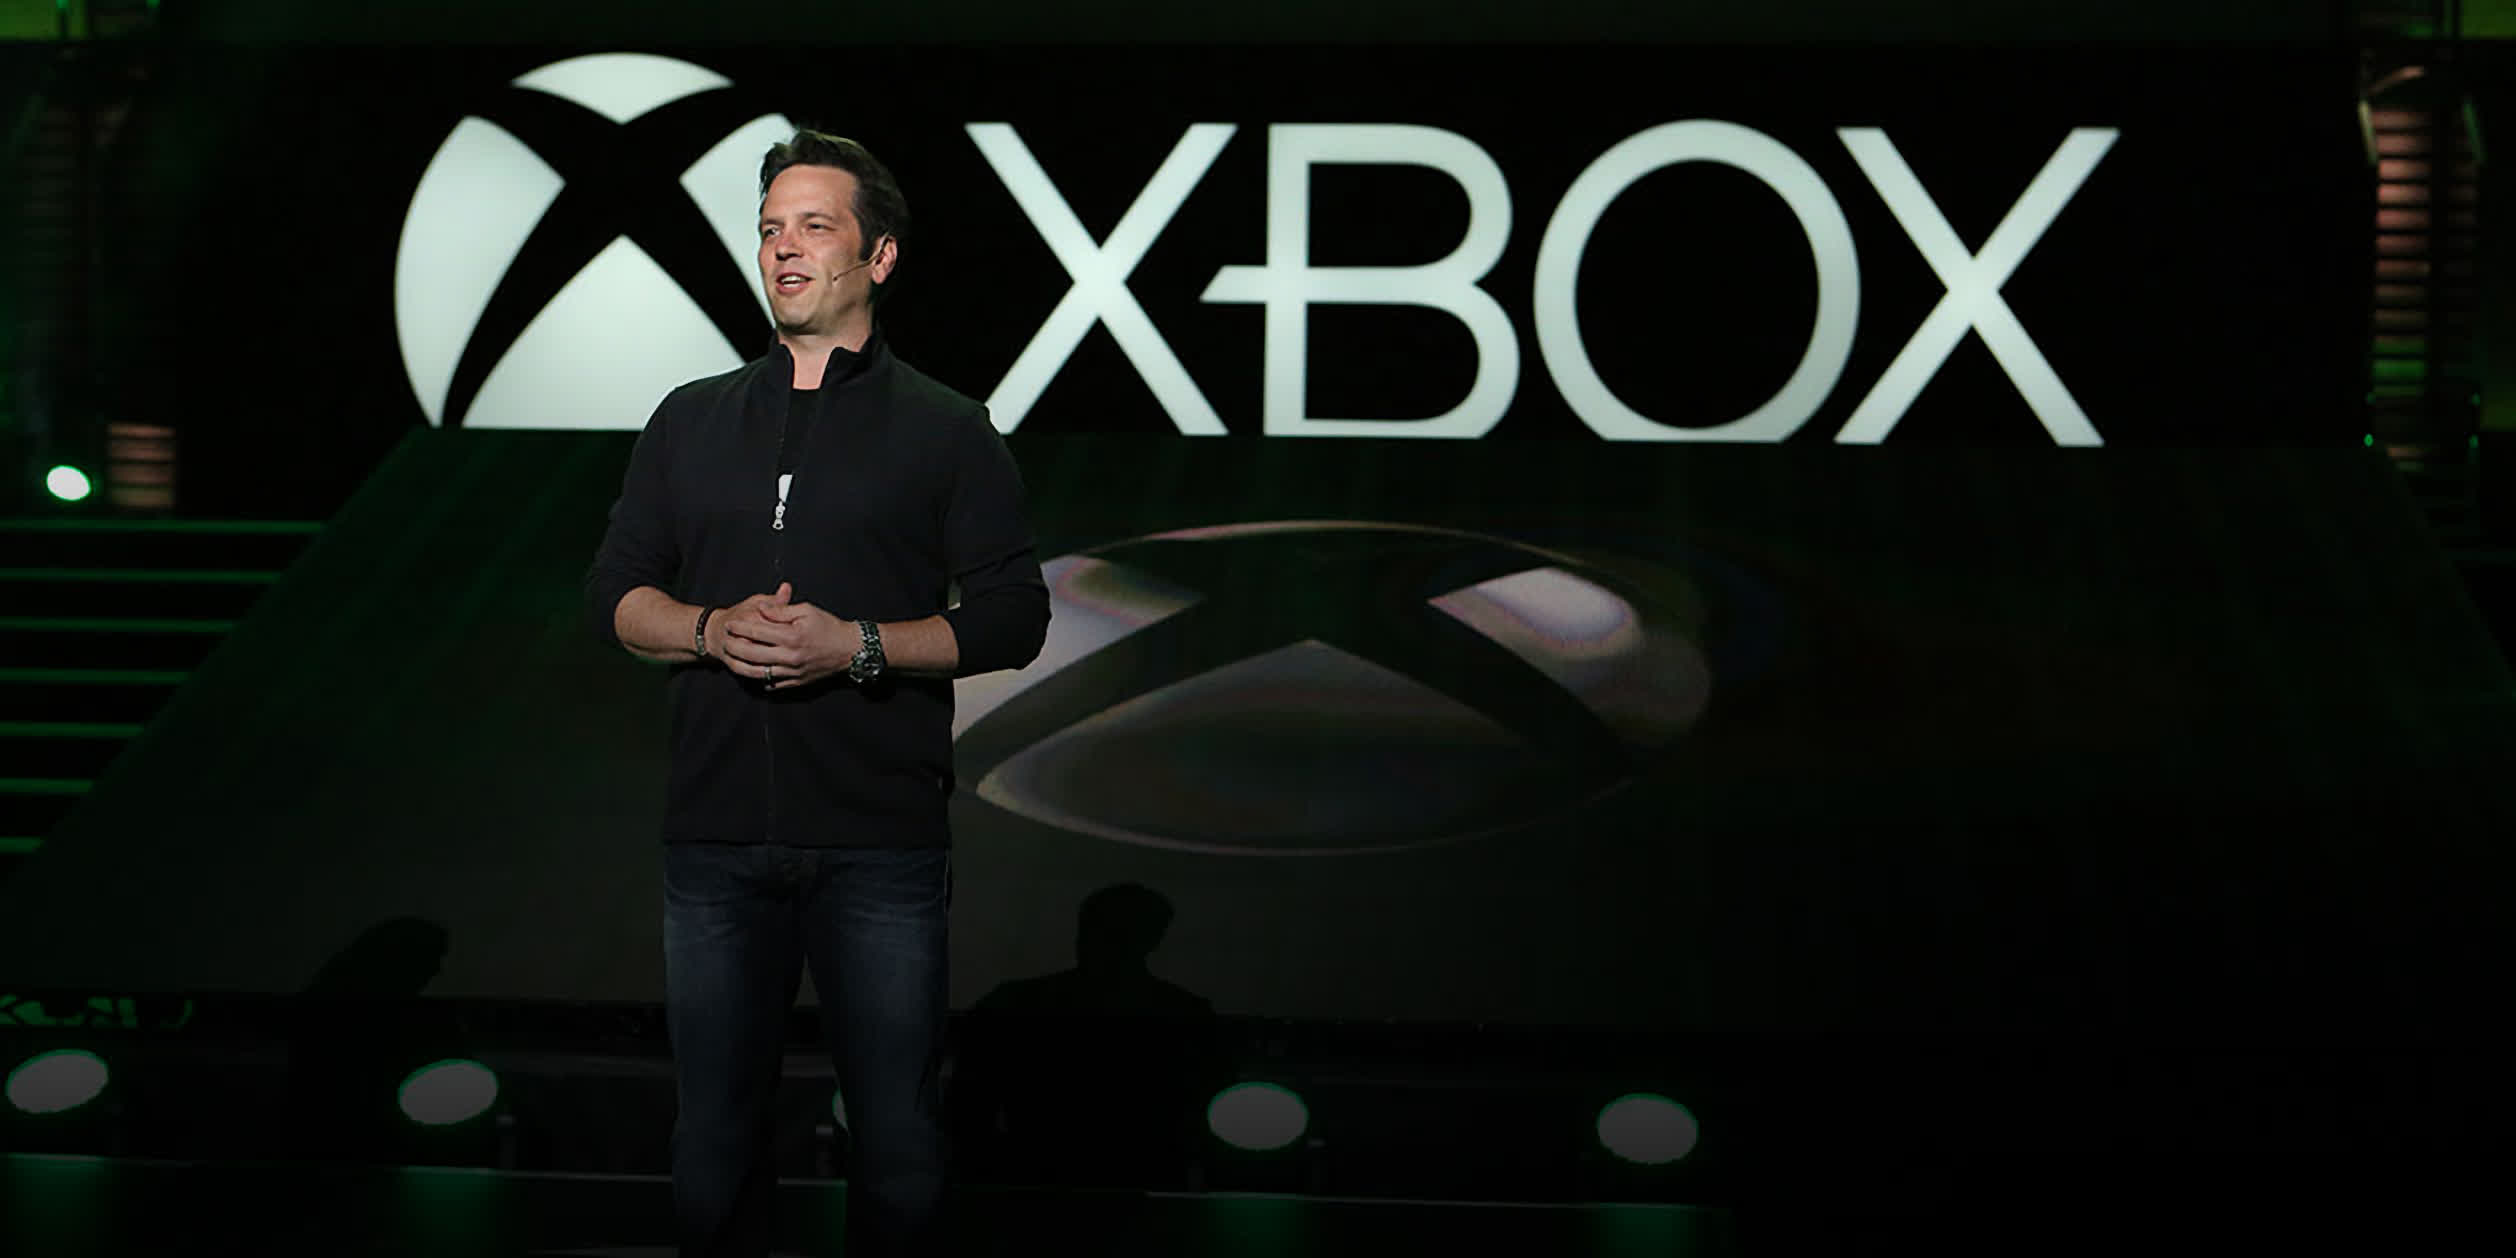 Phil Spencer is more interested in seeing gaming grow than taking market share from rivals